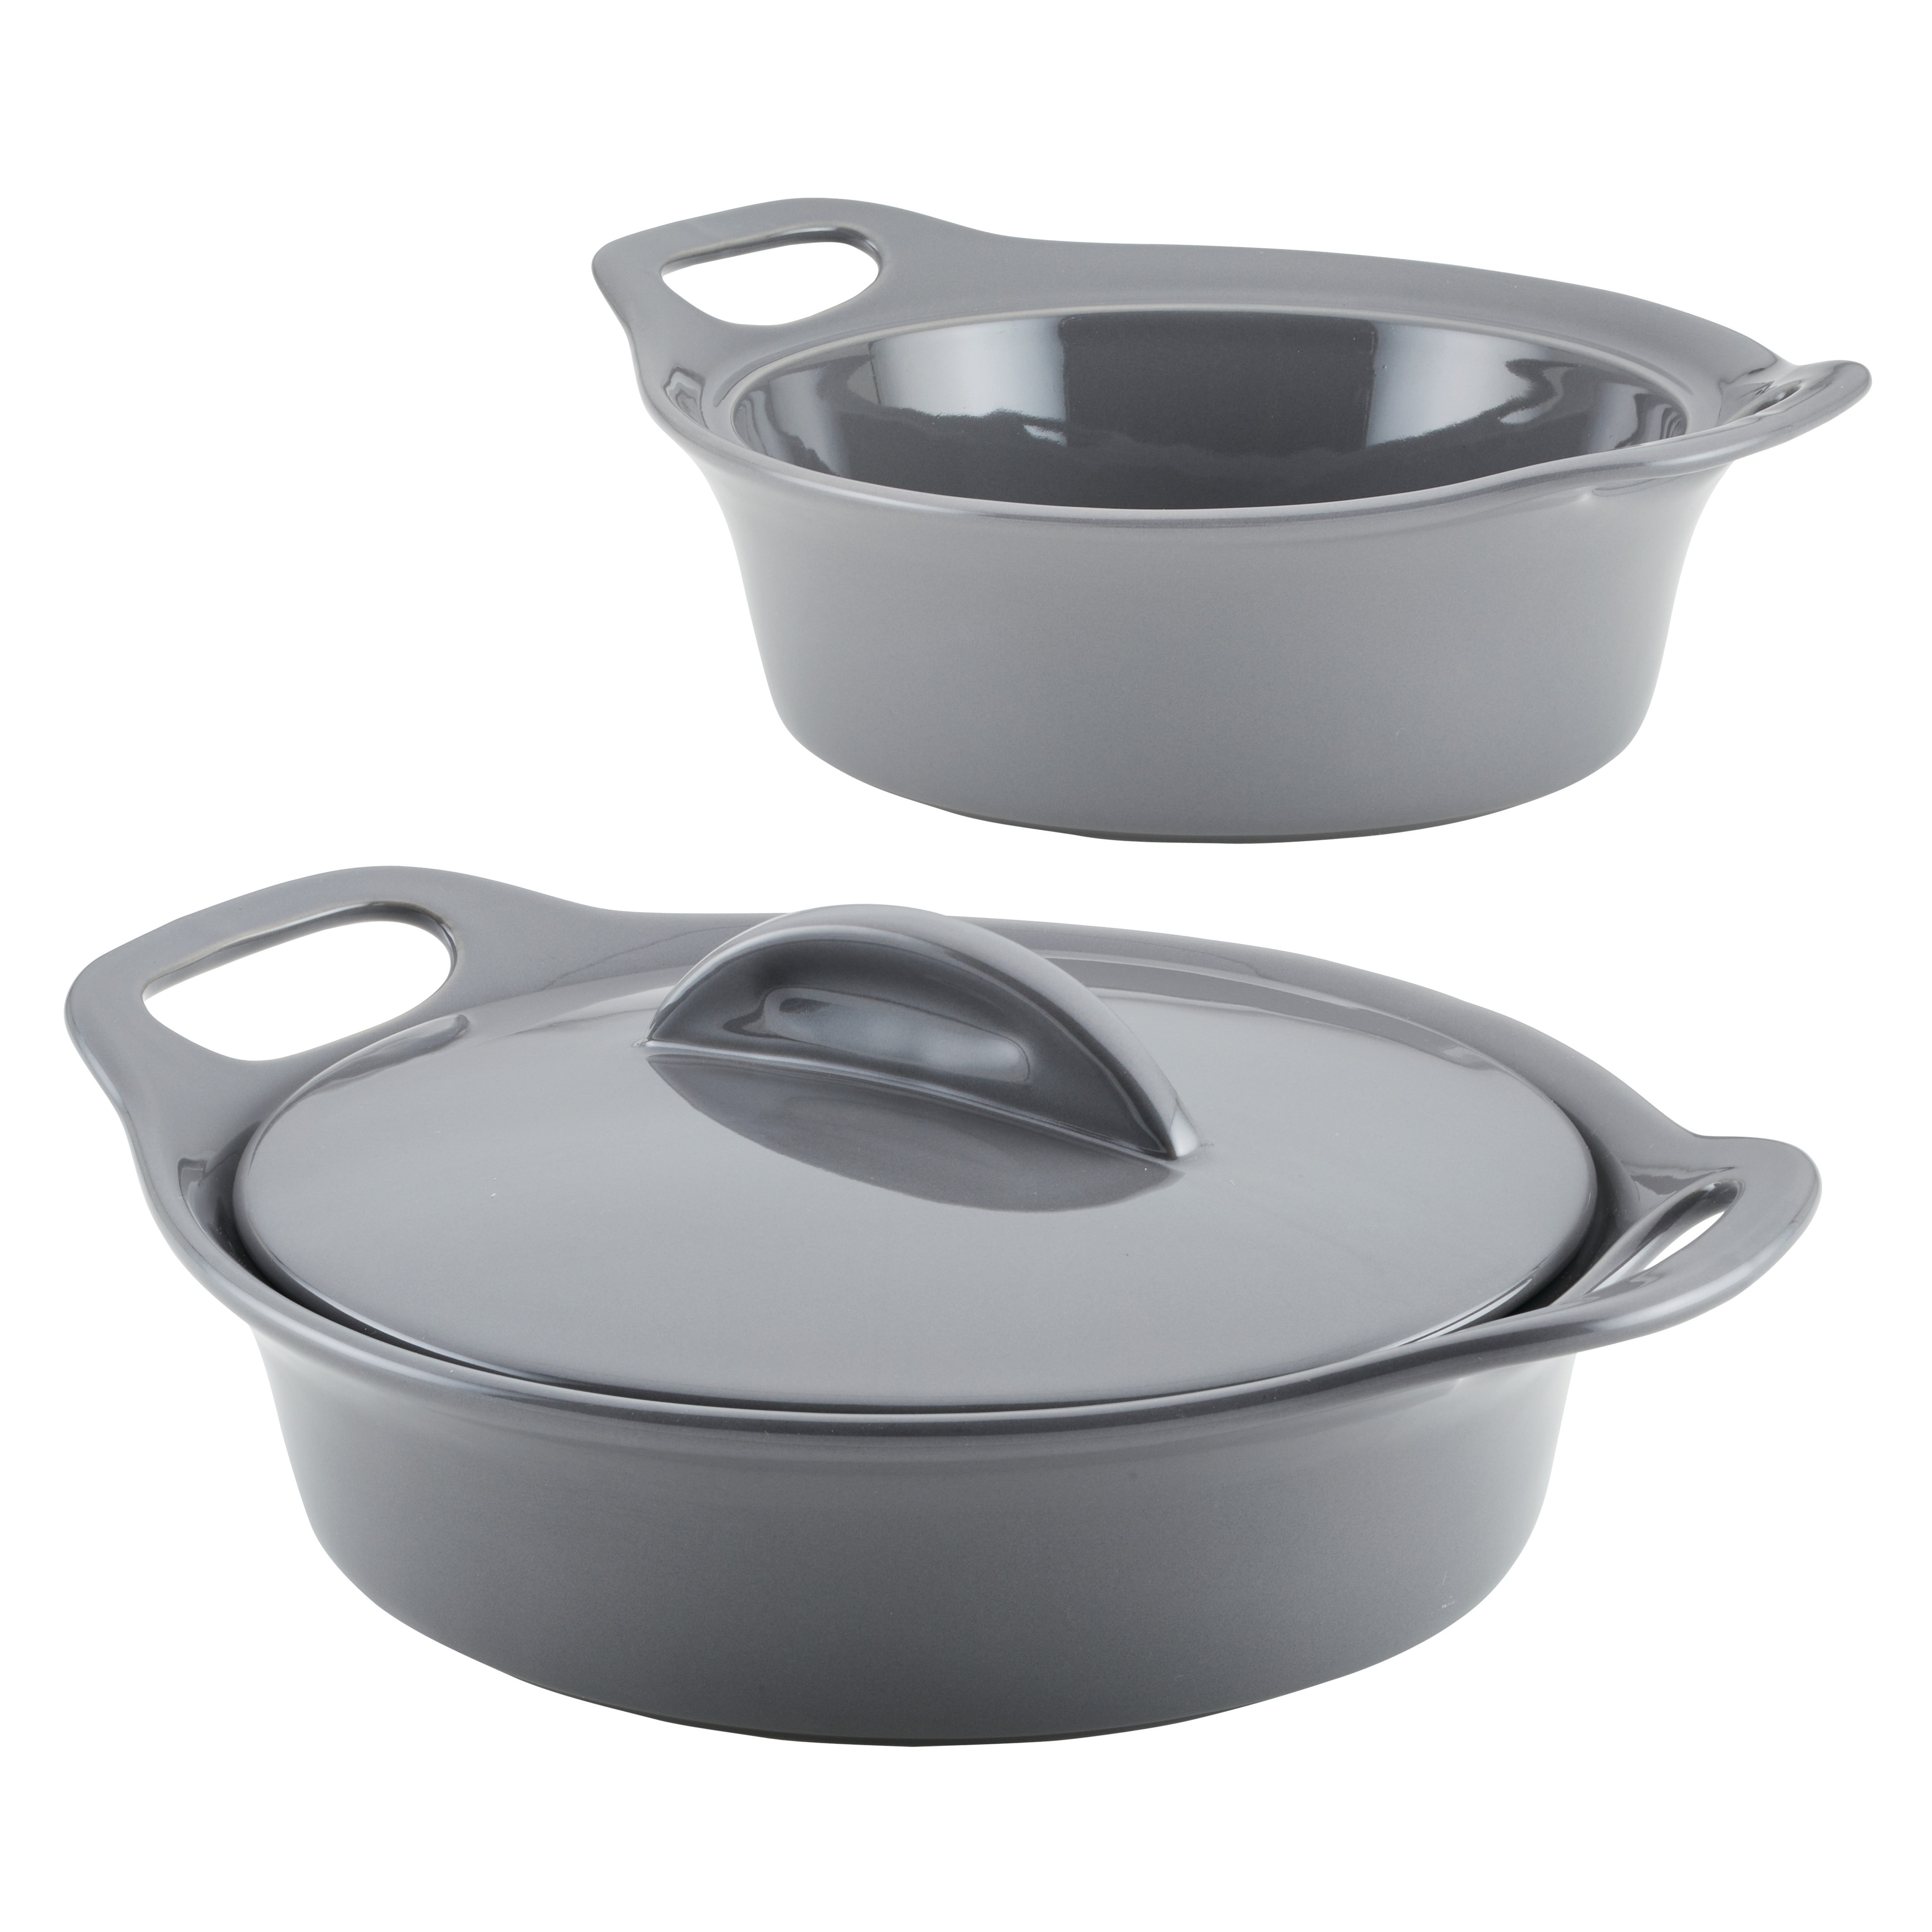 https://ak1.ostkcdn.com/images/products/is/images/direct/286e0705835ffcd56afb5f6d5b34c71db1596ddf/Rachael-Ray-Ceramic-Casserole-Bakers-with-Shared-Lid-Set%2C-3-Piece%2C-Dark-Gray.jpg